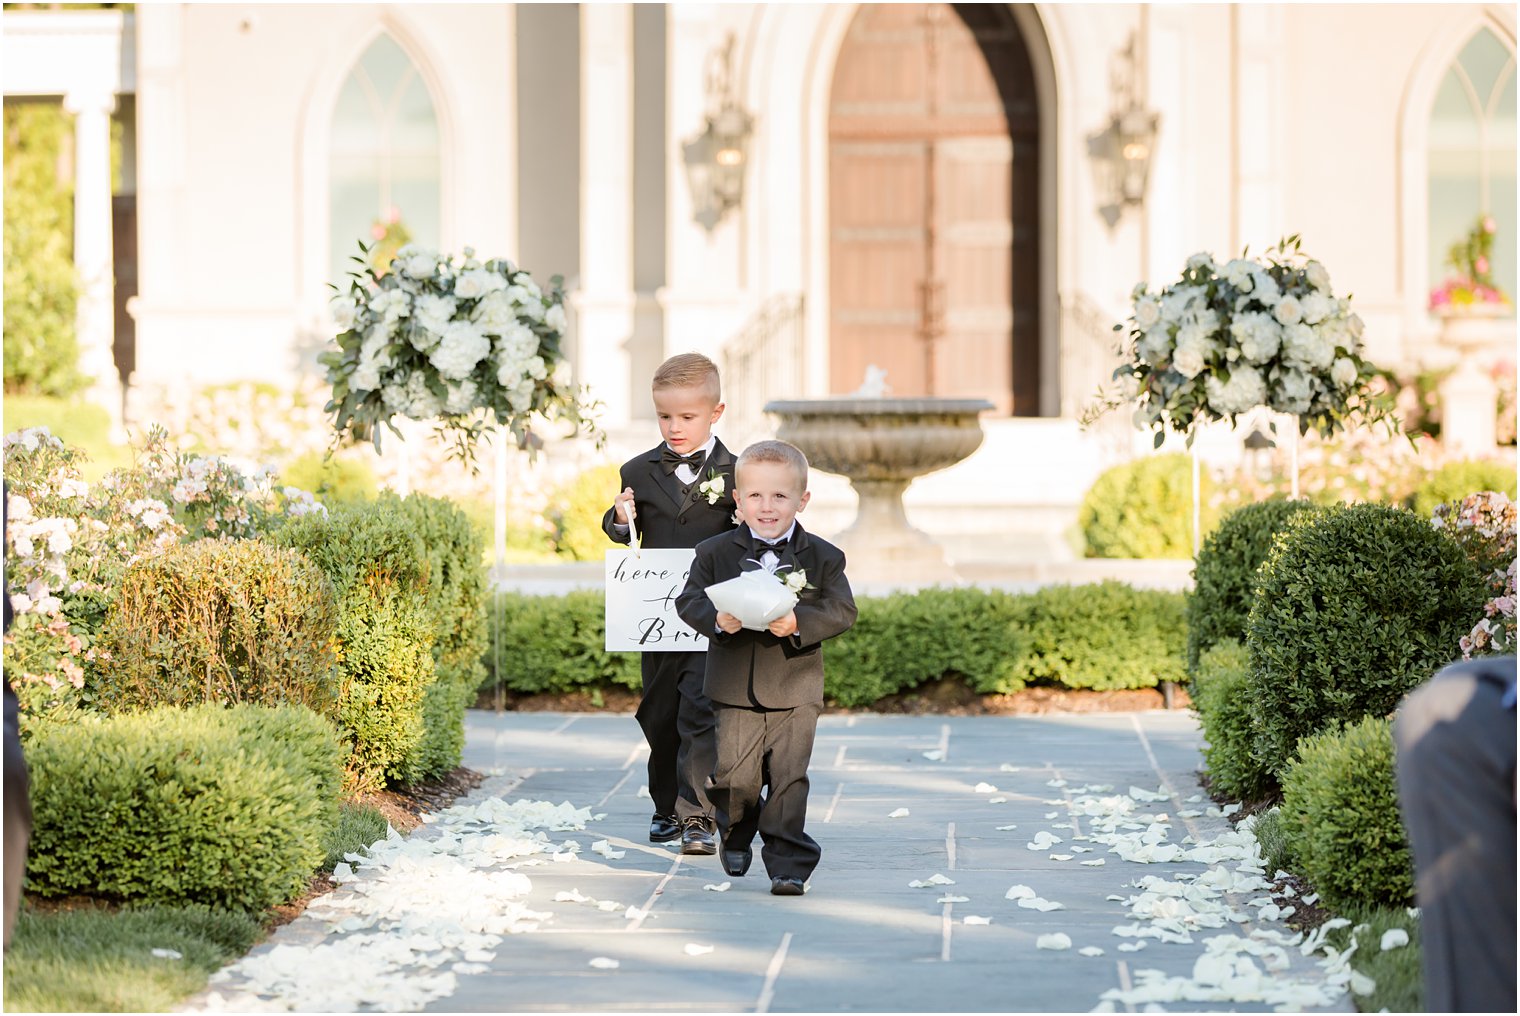 Ring bearers at outdoor wedding ceremony at Park Chateau Estate and Gardens